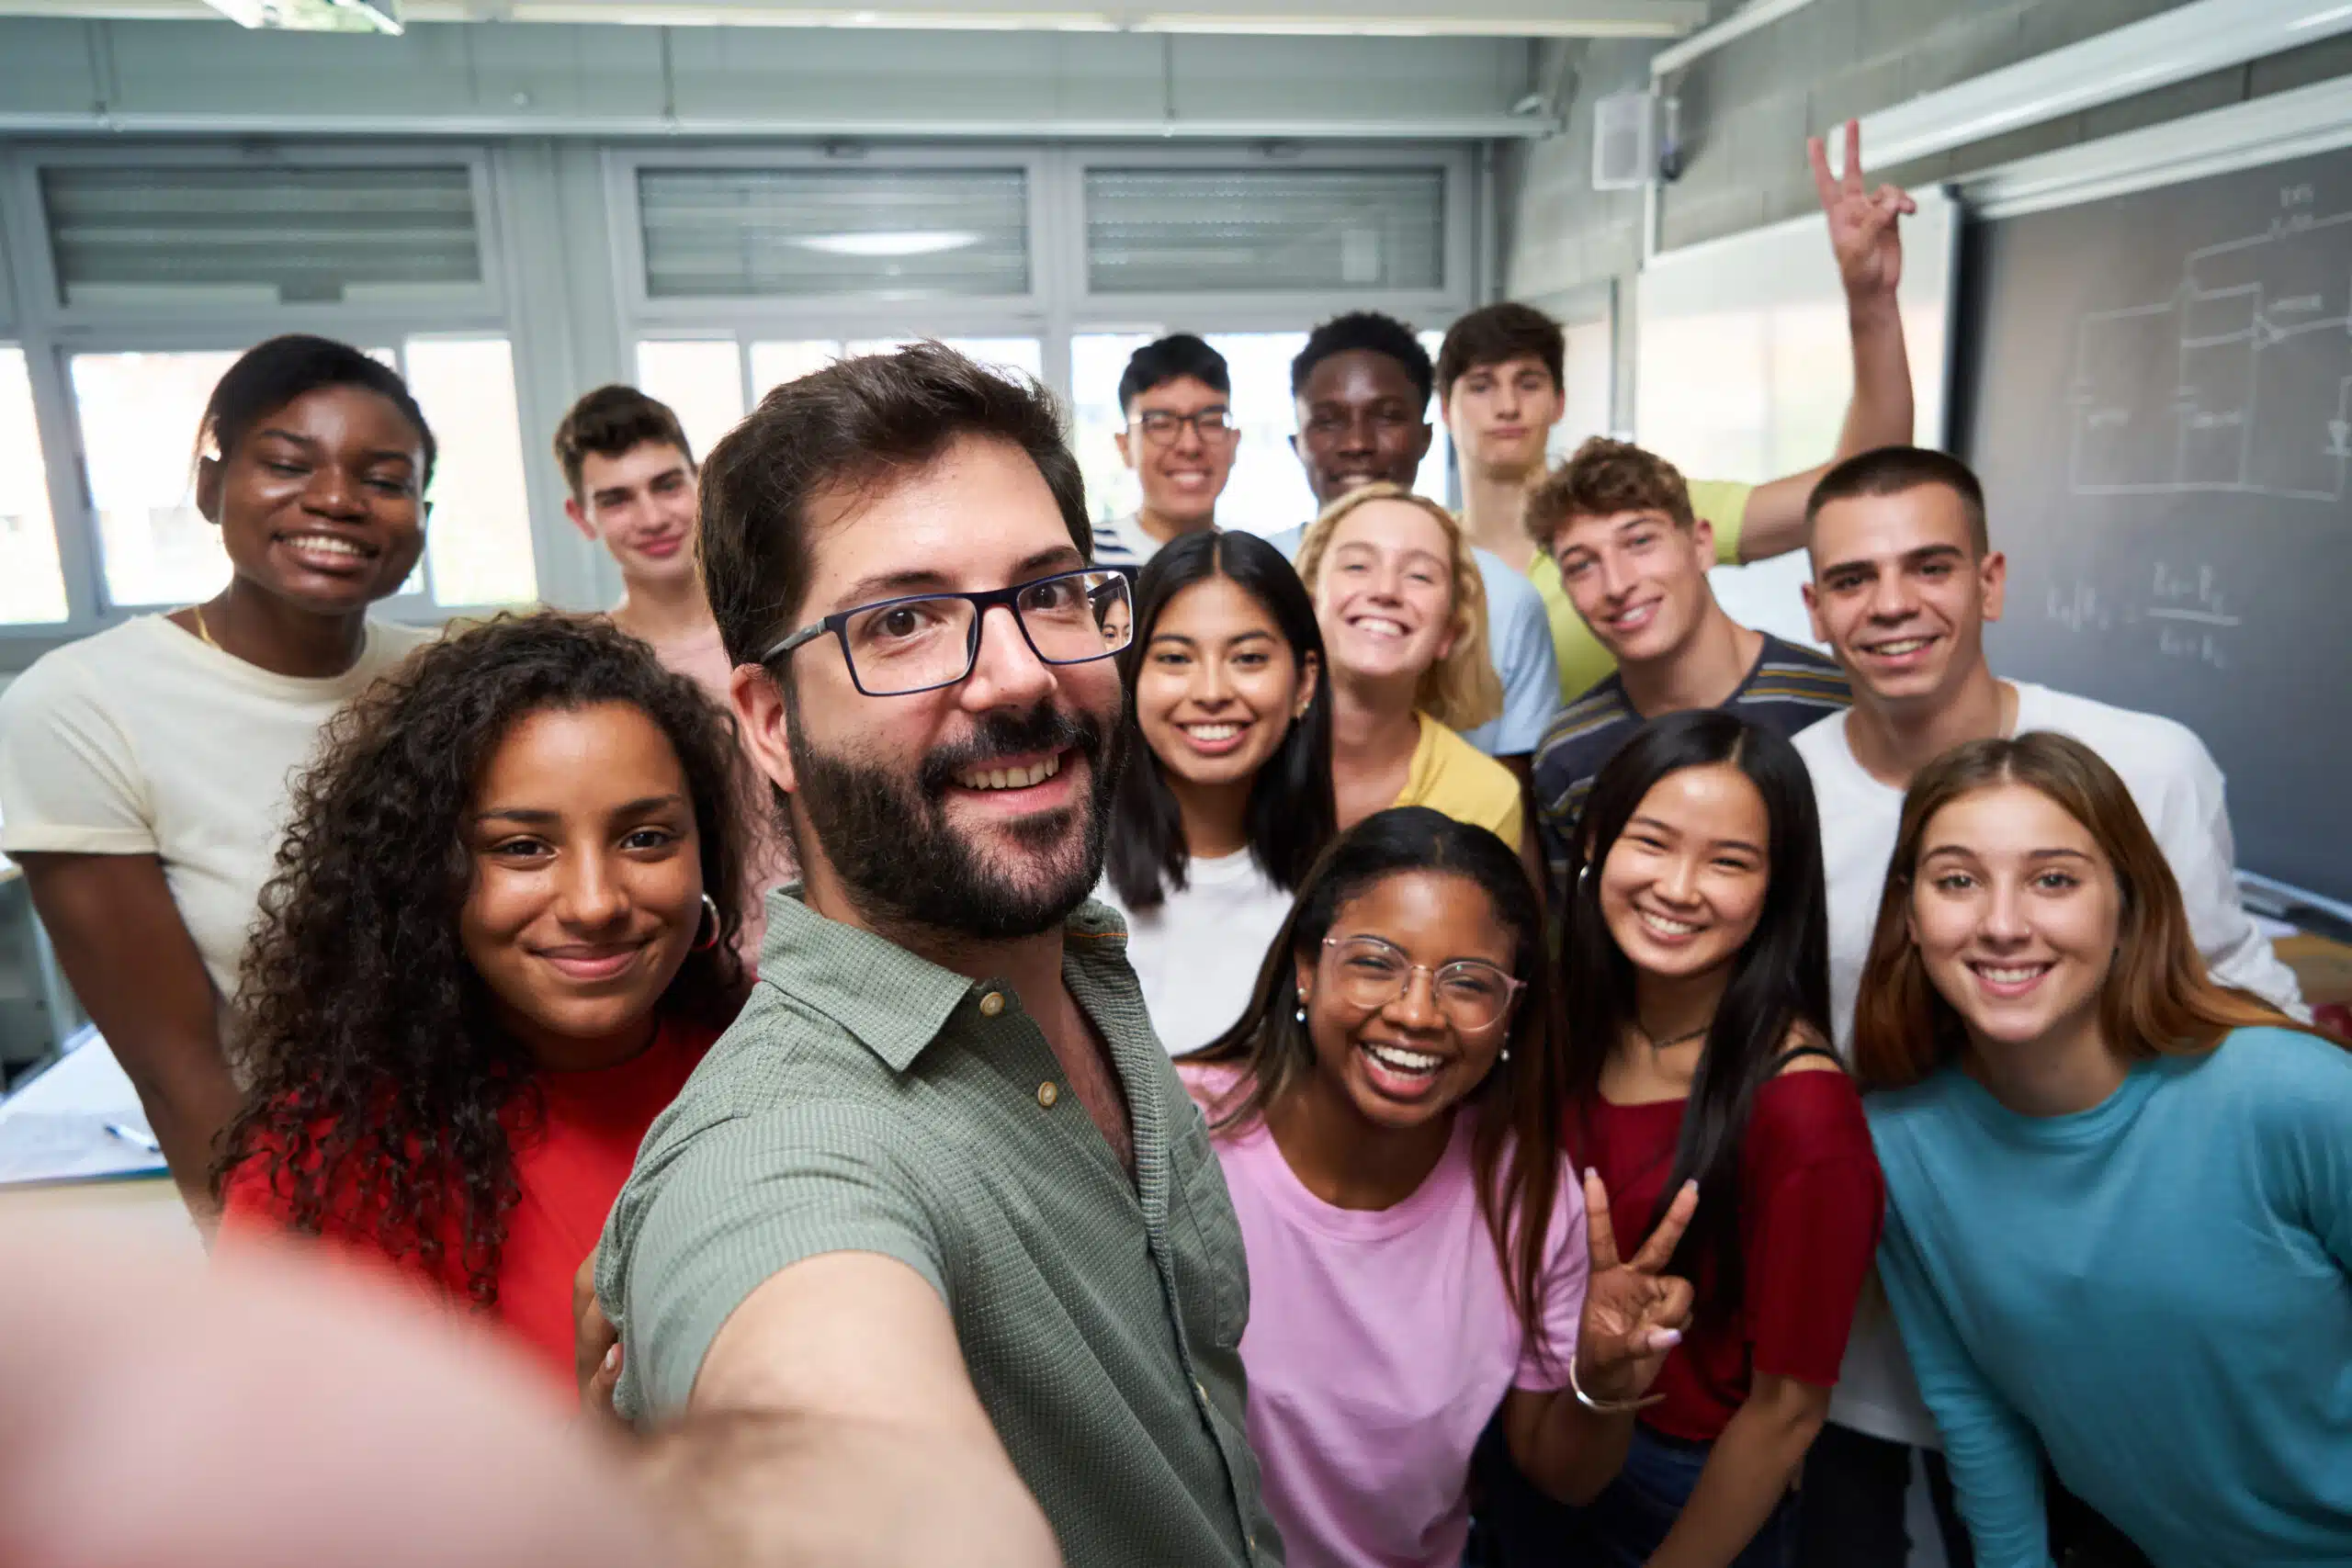 happy-selfie-of-young-group-of-students-and-teacher